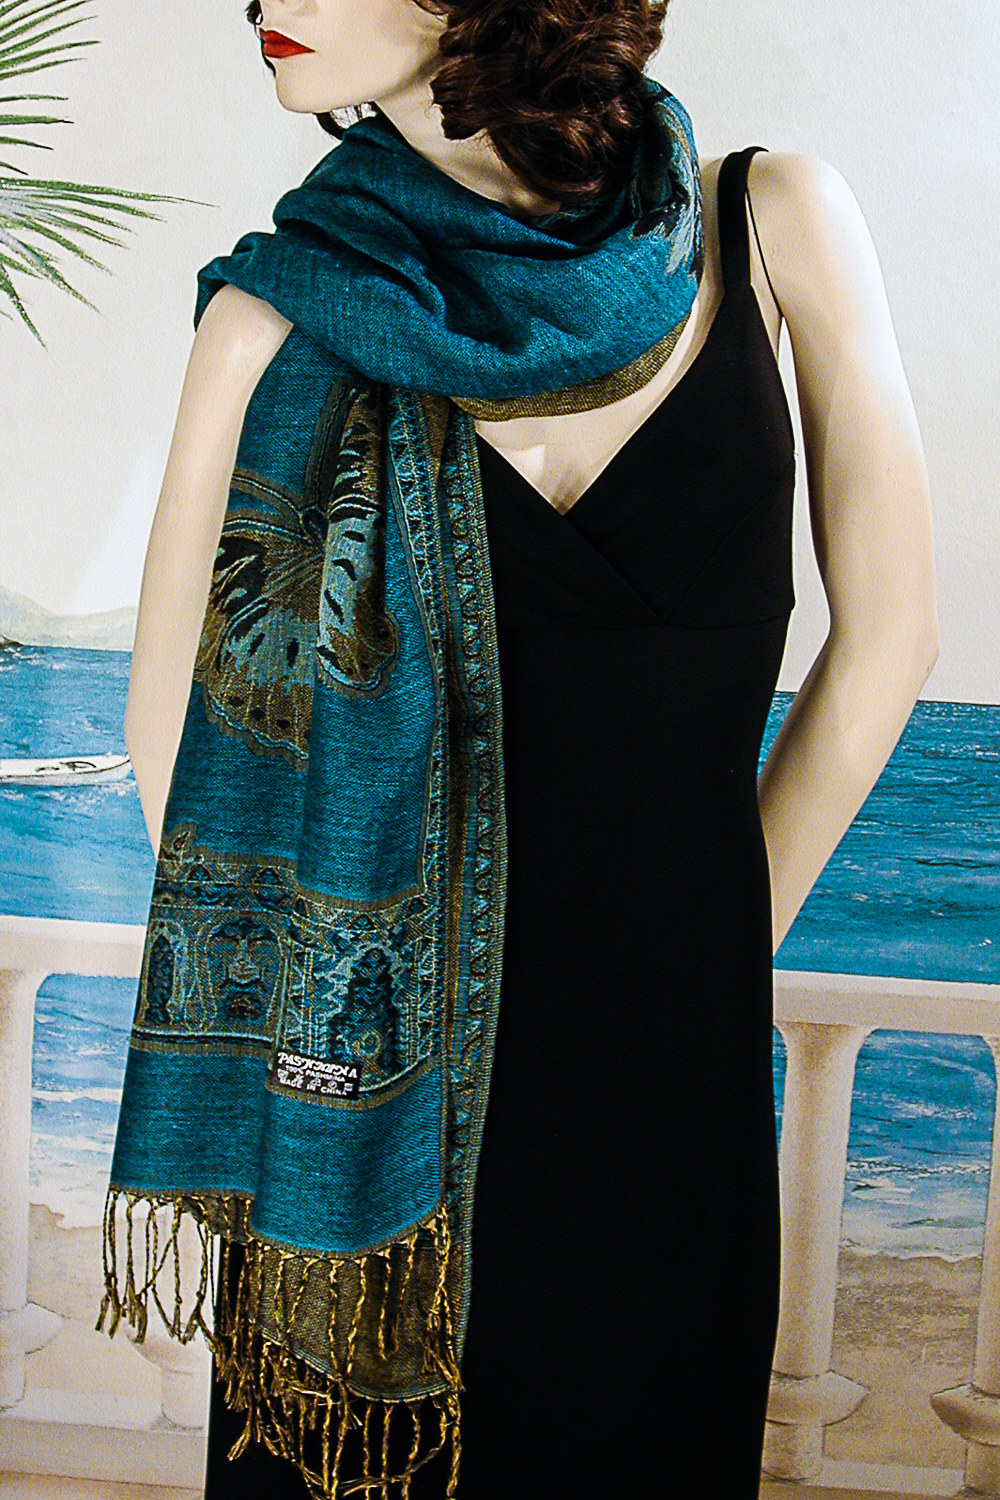 Pashmina Shawls with Feather Starburst Design, a fashion accessorie - Evening Elegance